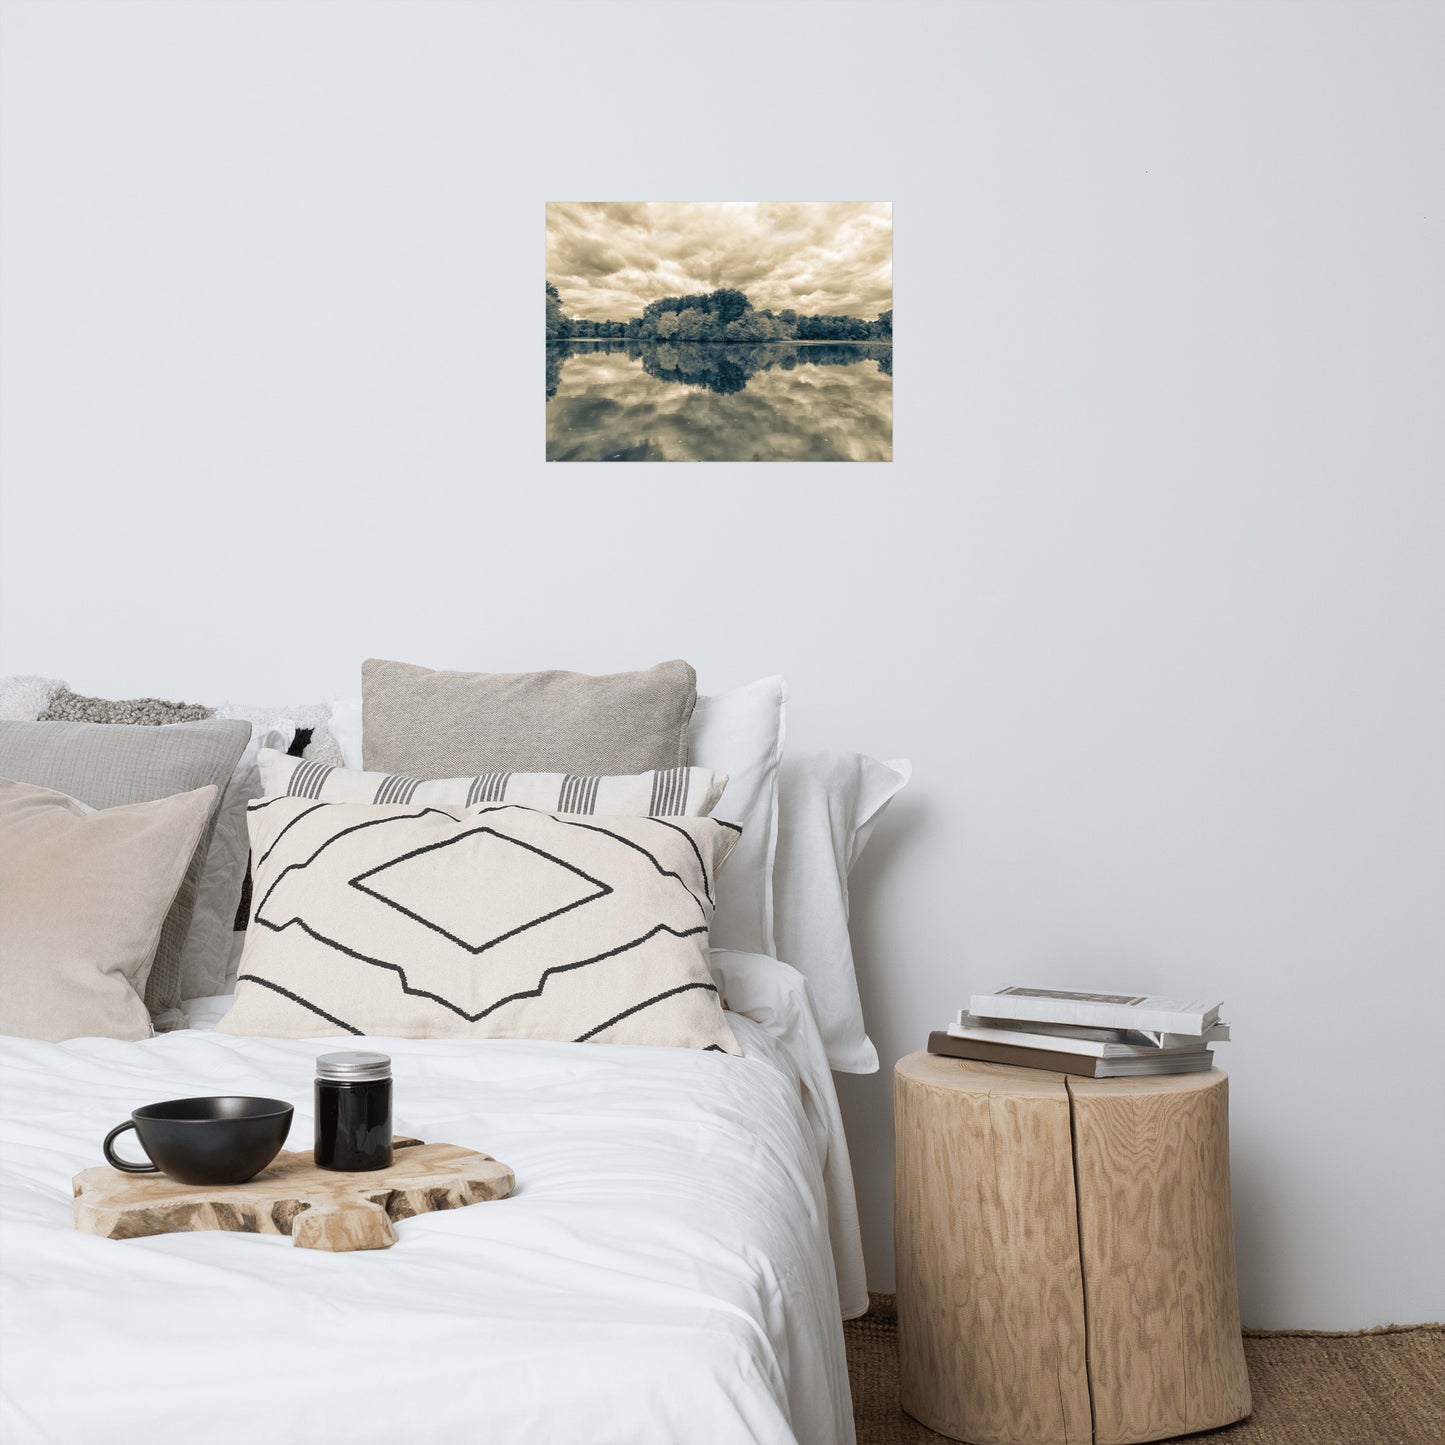 Unique Bedroom Wall Decor: Fall Trees on Edge of Pond With Stormy Sky Split Tone - Rural / Country Style Landscape / Nature Loose / Unframed / Frameless / Frameable Photograph Wall Art Print - Artwork